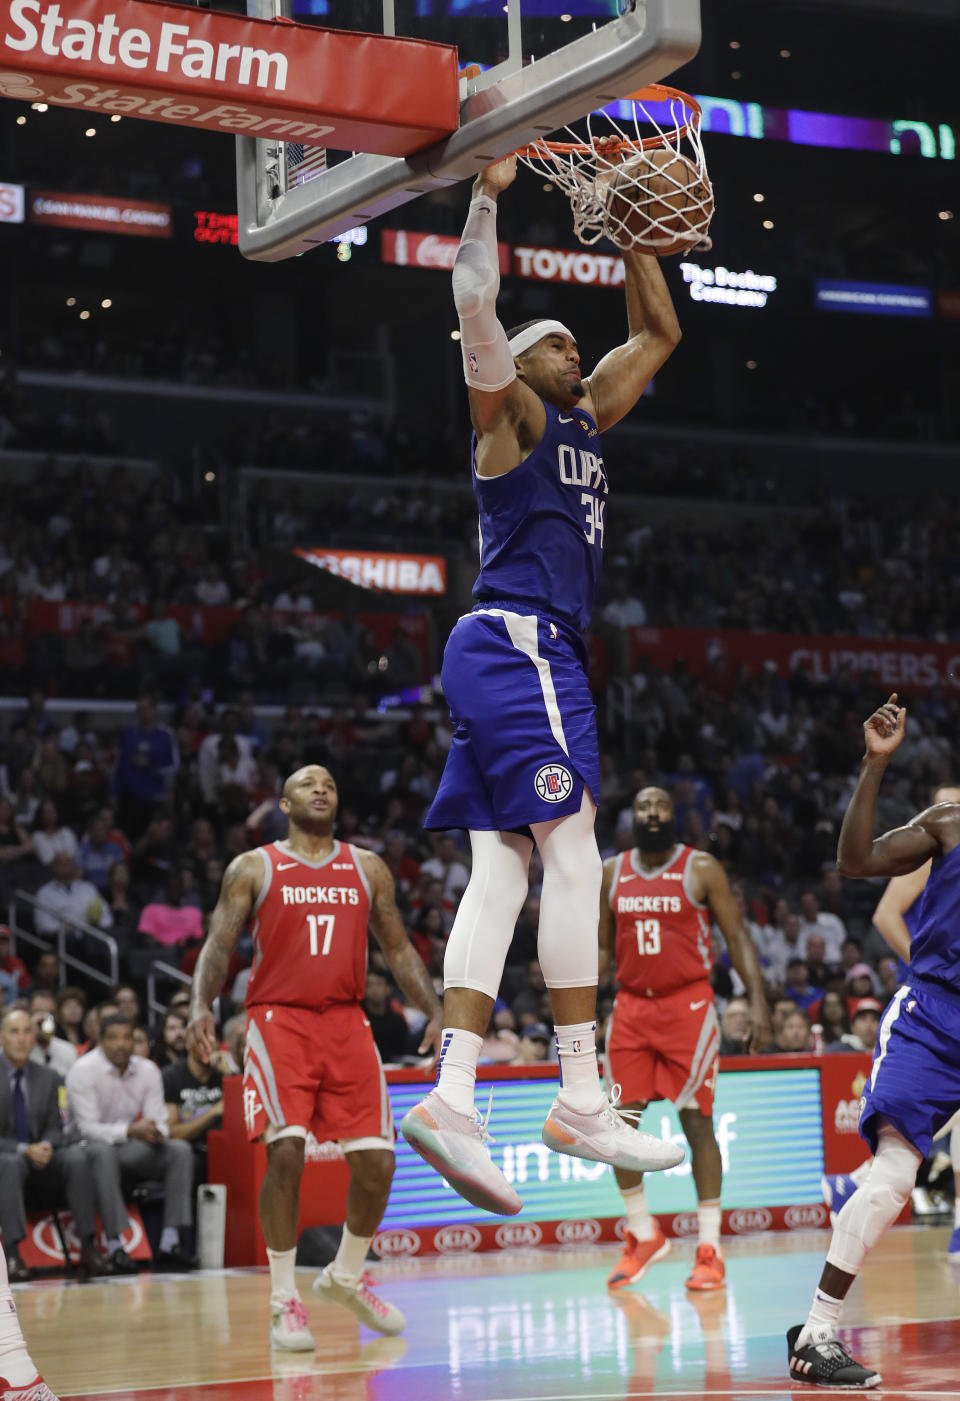 Los Angeles Clippers' Tobias Harris (34) dunks against the Houston Rockets during the first half of an NBA basketball game Sunday, Oct. 21, 2018, in Los Angeles. (AP Photo/Marcio Jose Sanchez)